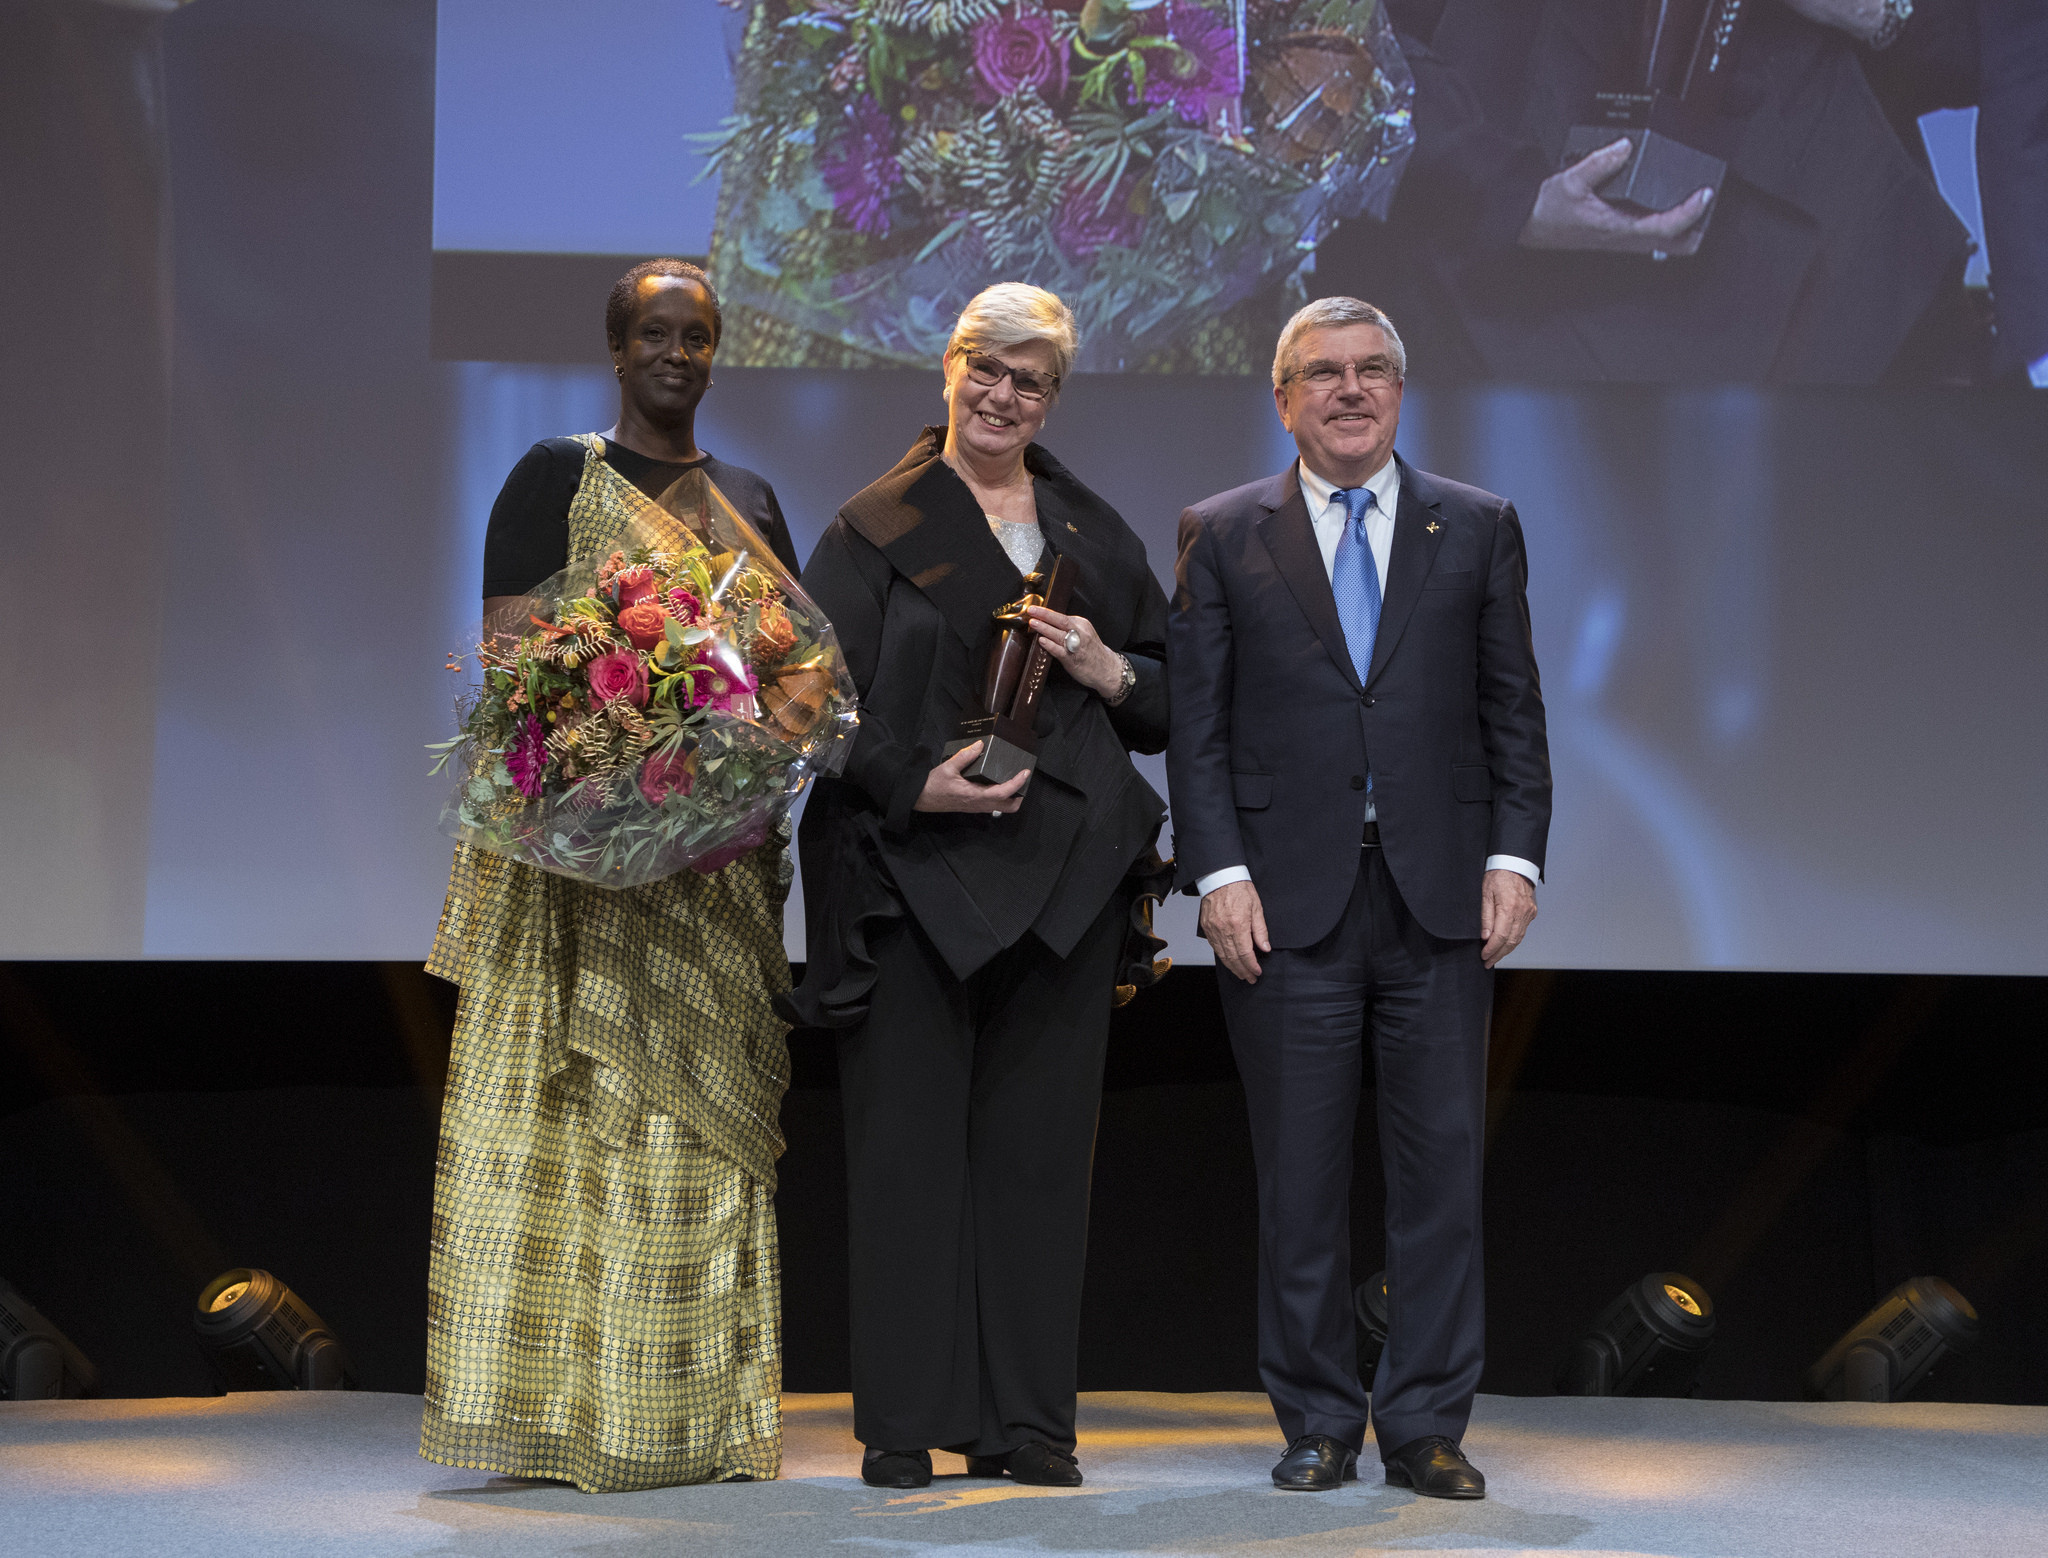 New Leaders is a legacy project of Finland's Birgitta Kervinen, centre, the winner of the 2017 IOC Women and Sport World Trophy presented by Thomas Bach, the IOC President, right ©IOC